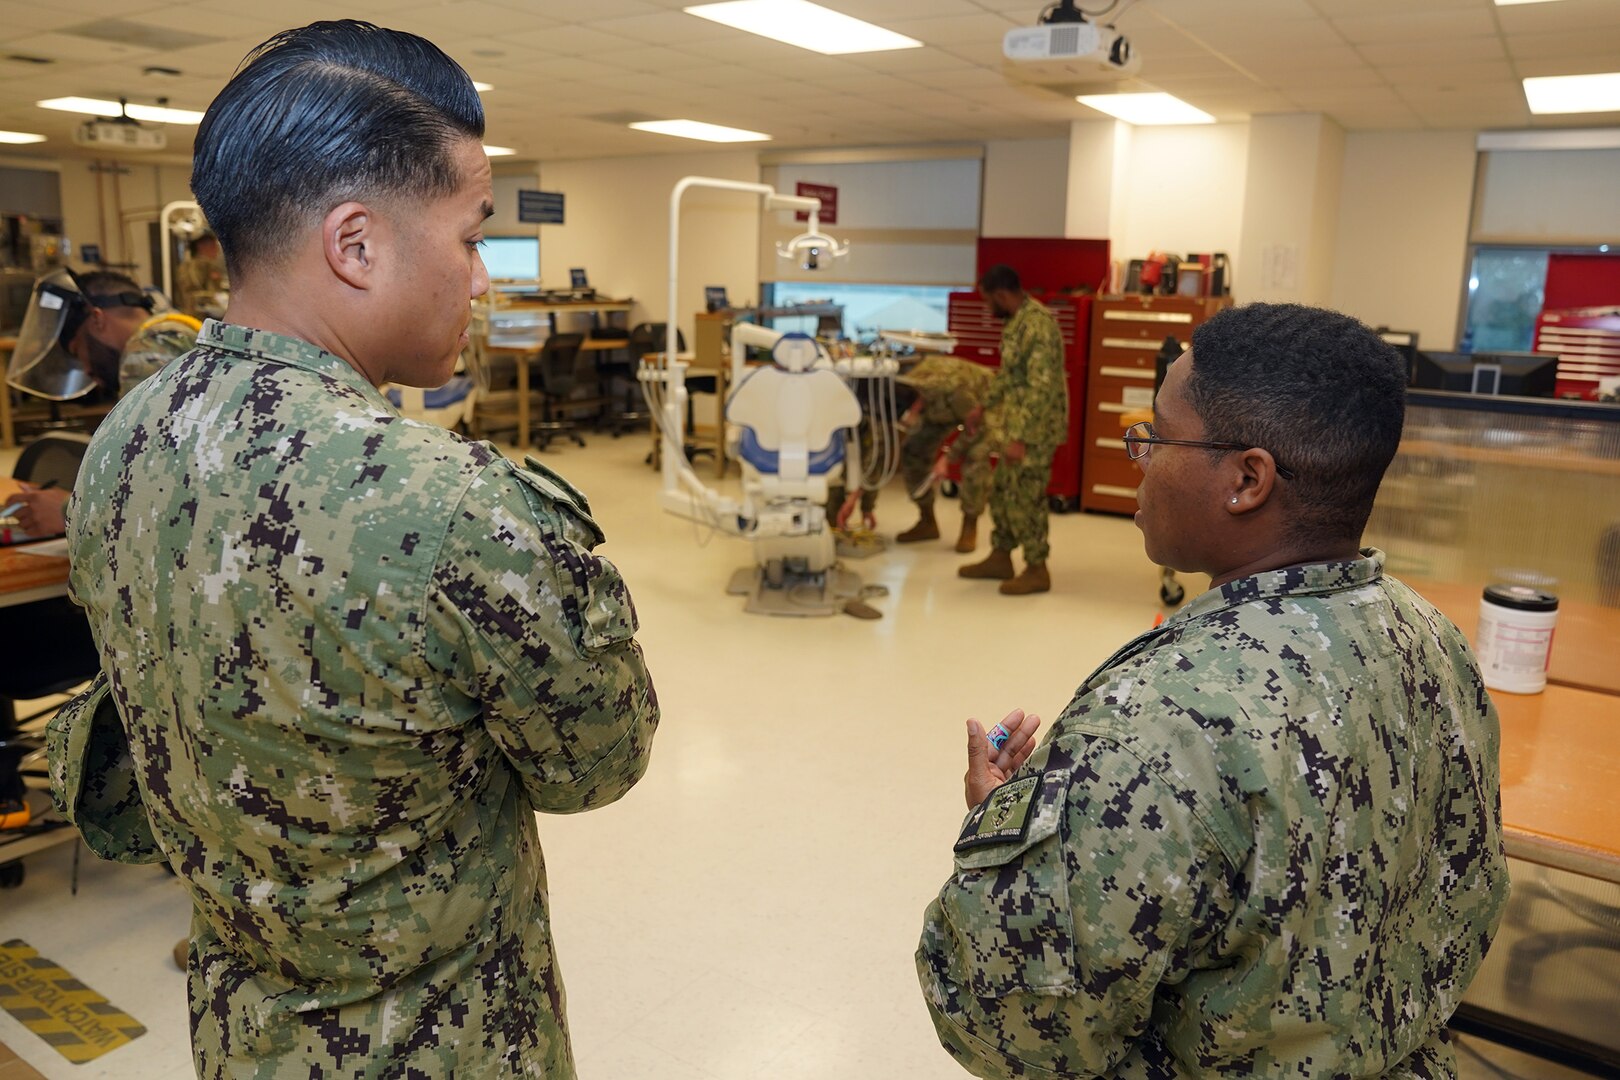 JOINT BASE SAN ANTONIO-FORT SAM HOUSTON – (Jan. 24, 2024) – Chief Hospital Corpsman Lika Brooks, of Honolulu, a biomedical instructor assigned to Navy Medicine Training Support Center (NMTSC), gives a tour of facilities at the Defense Health Agency’s (DHA) Medical Training and Education Campus (METC) to Force Master Chief PatrickPaul Mangaran, director, Hospital Corps, U.S. Navy Bureau of Medicine and Surgery (BUMED). METC is a leader in military medical education with over 48 academic programs in various medical specialties. With 48 medical programs, and 16,500 graduates a year, METC is a state-of-the-art Department of Defense (DoD) healthcare education campus that trains enlisted medical personnel. (U.S. Navy photo by Burrell Parmer, NMFSC Public Affairs/Released)